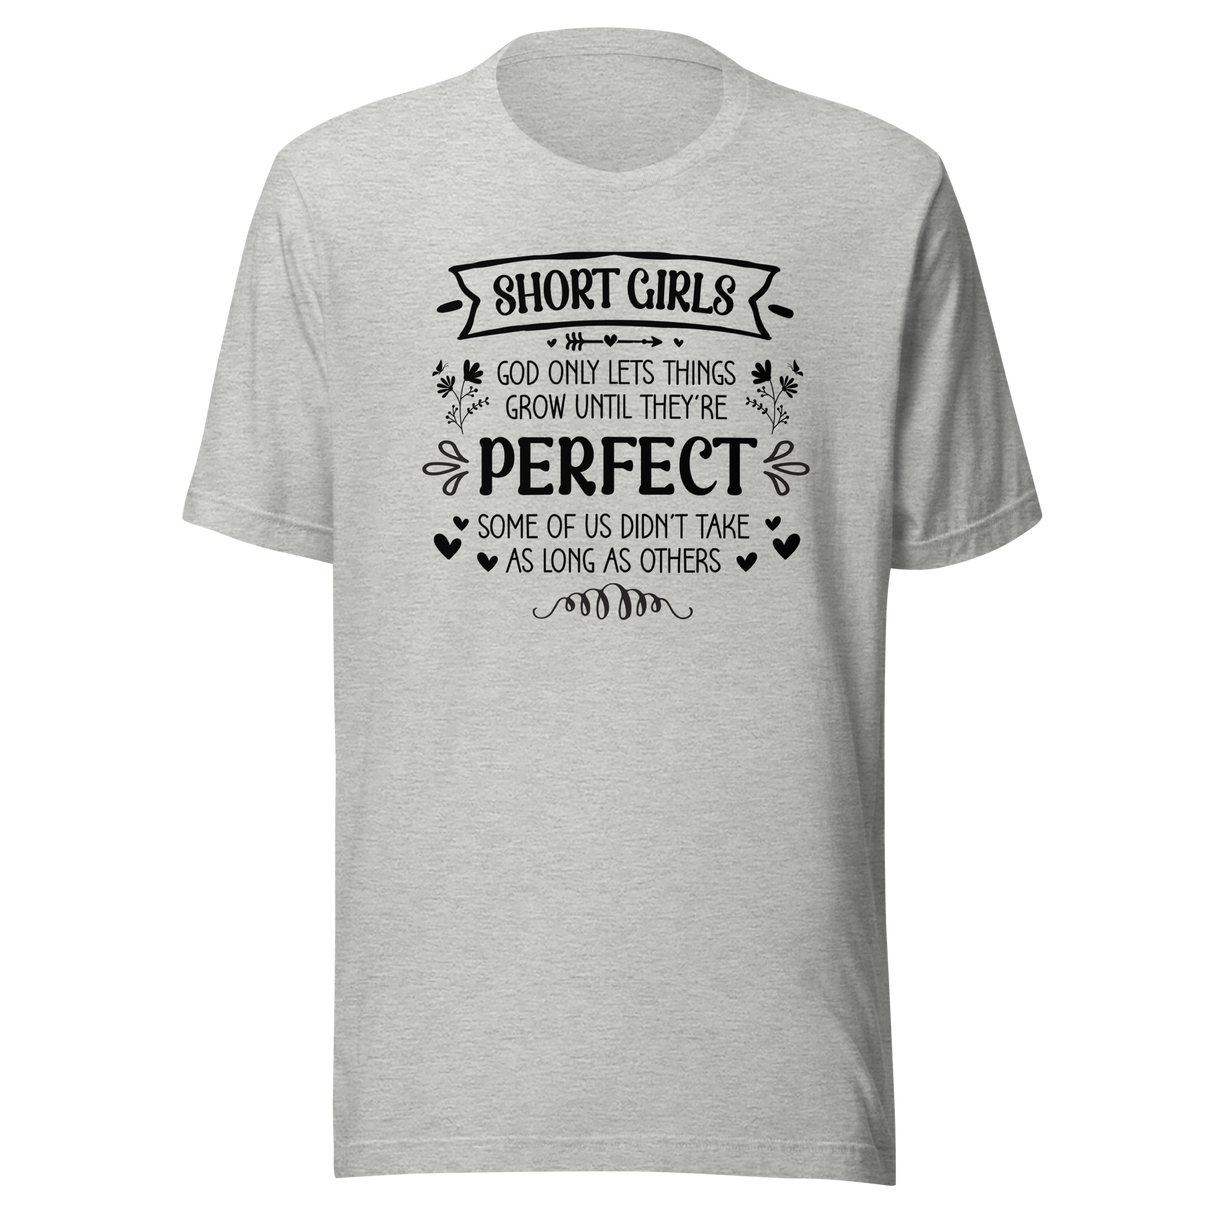 short-girls-god-only-lets-things-grow-until-theyre-perfect-some-of-us-didnt-take-as-long-as-others-life-tee-inspirational-t-shirt-empowering-tee-short-t-shirt-girls-tee#color_athletic-heather